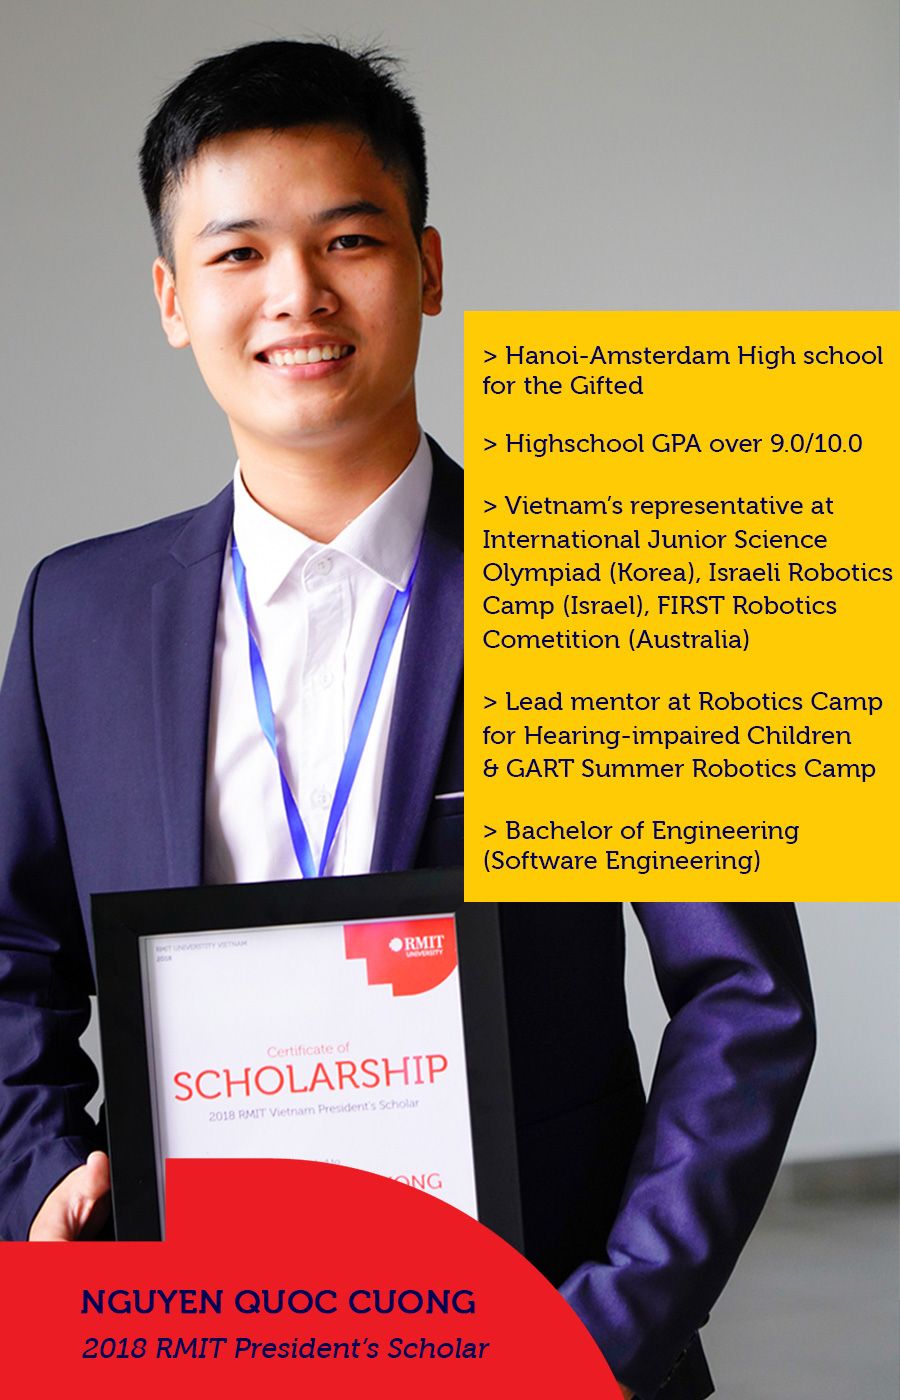 Nguyen Quoc Cuong, RMIT Vietnam President's 2018 Scholar, has enrolled in the Bachelor of Engineering (Software Engineering)(Honours) program.